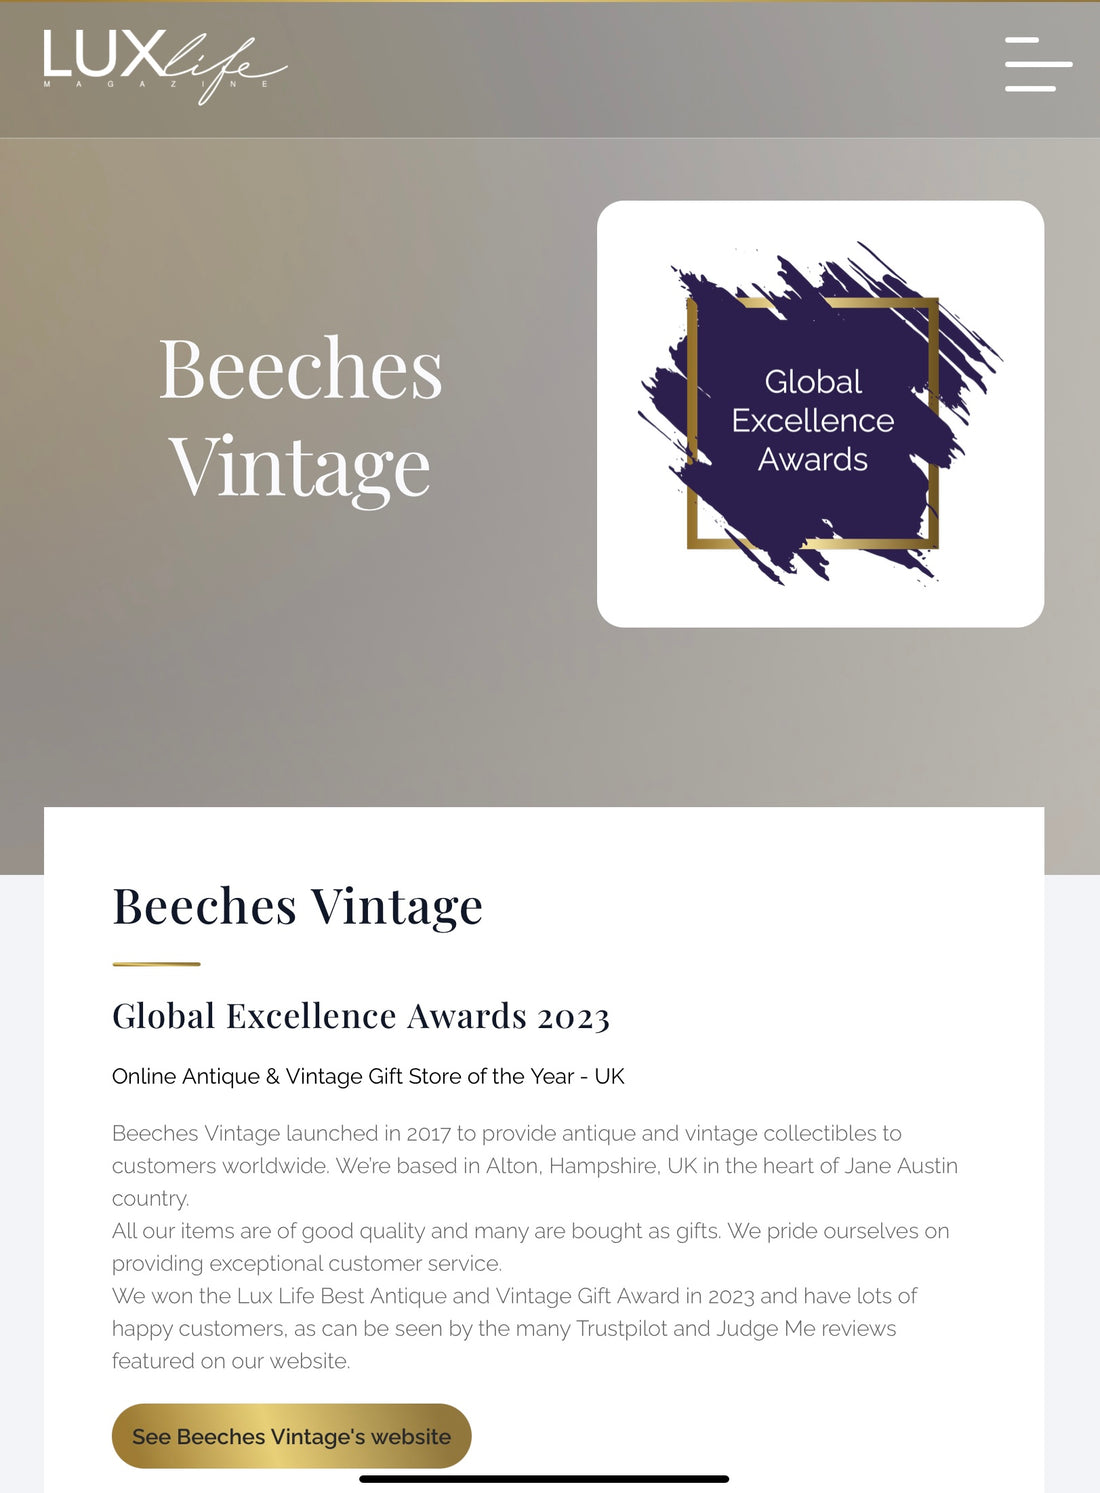 Beeches Vintage is a Global Excellence Award Winner!